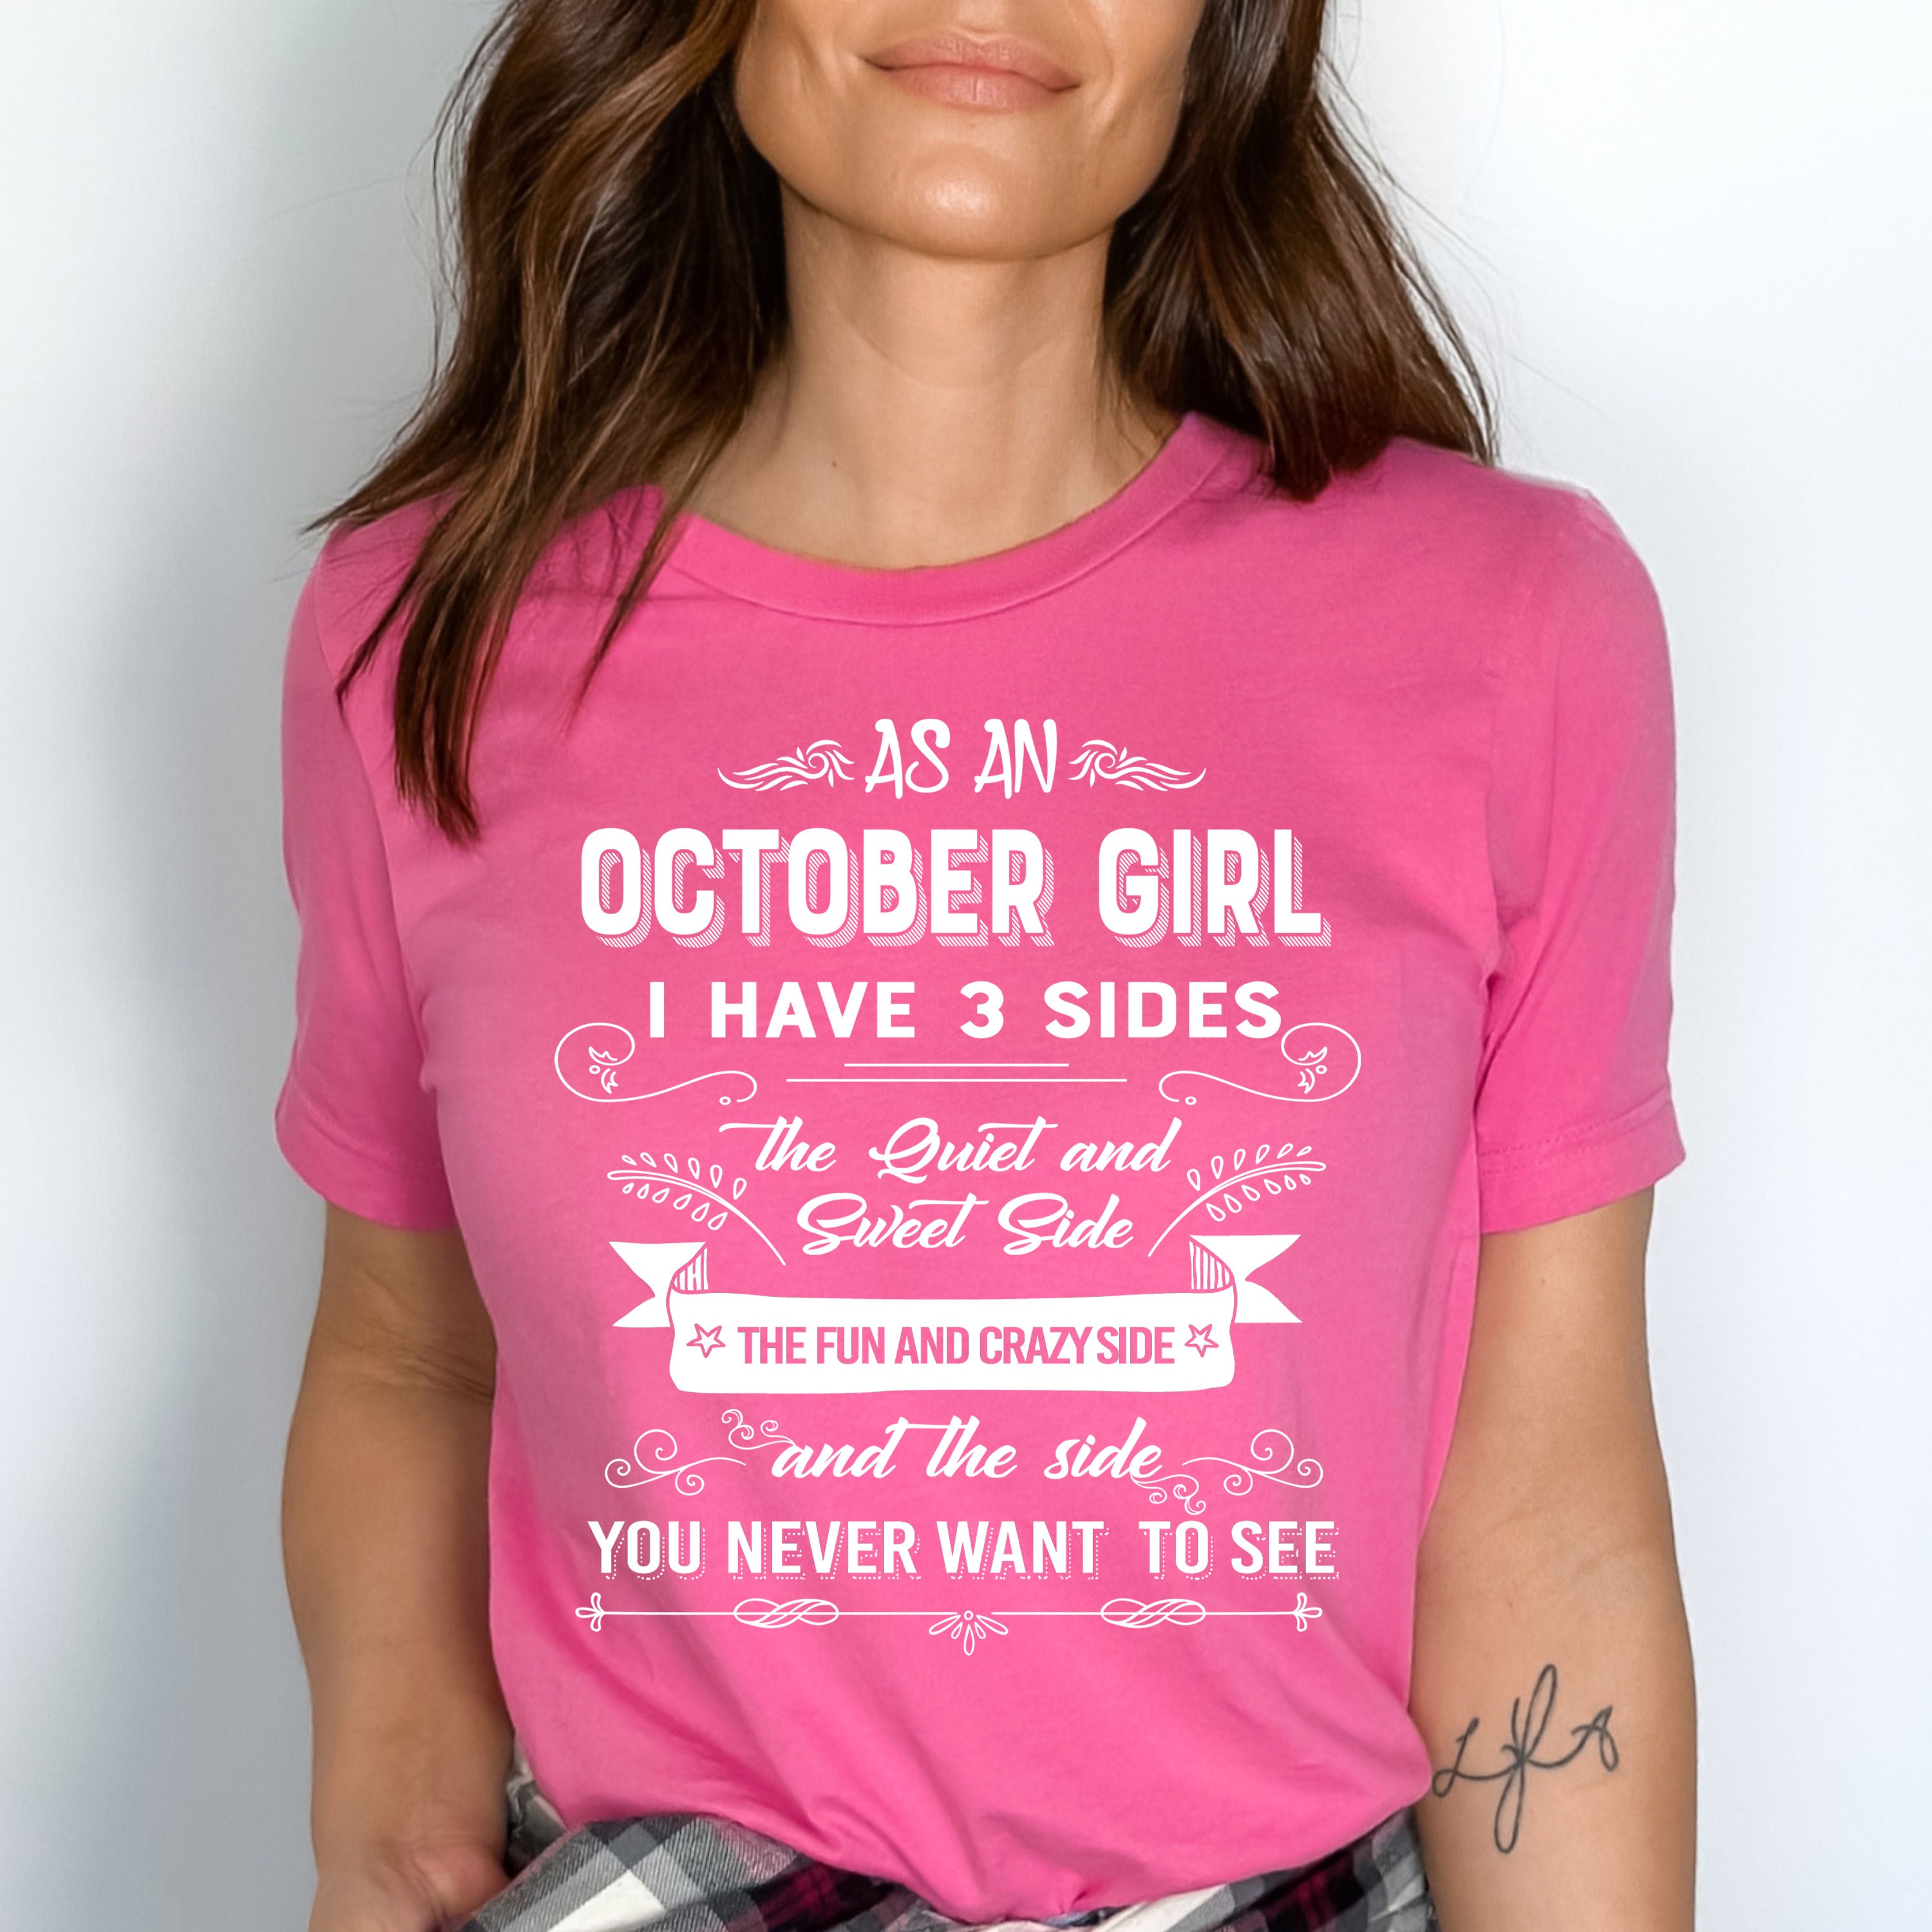 "As a October Girl I have 3 Sides"